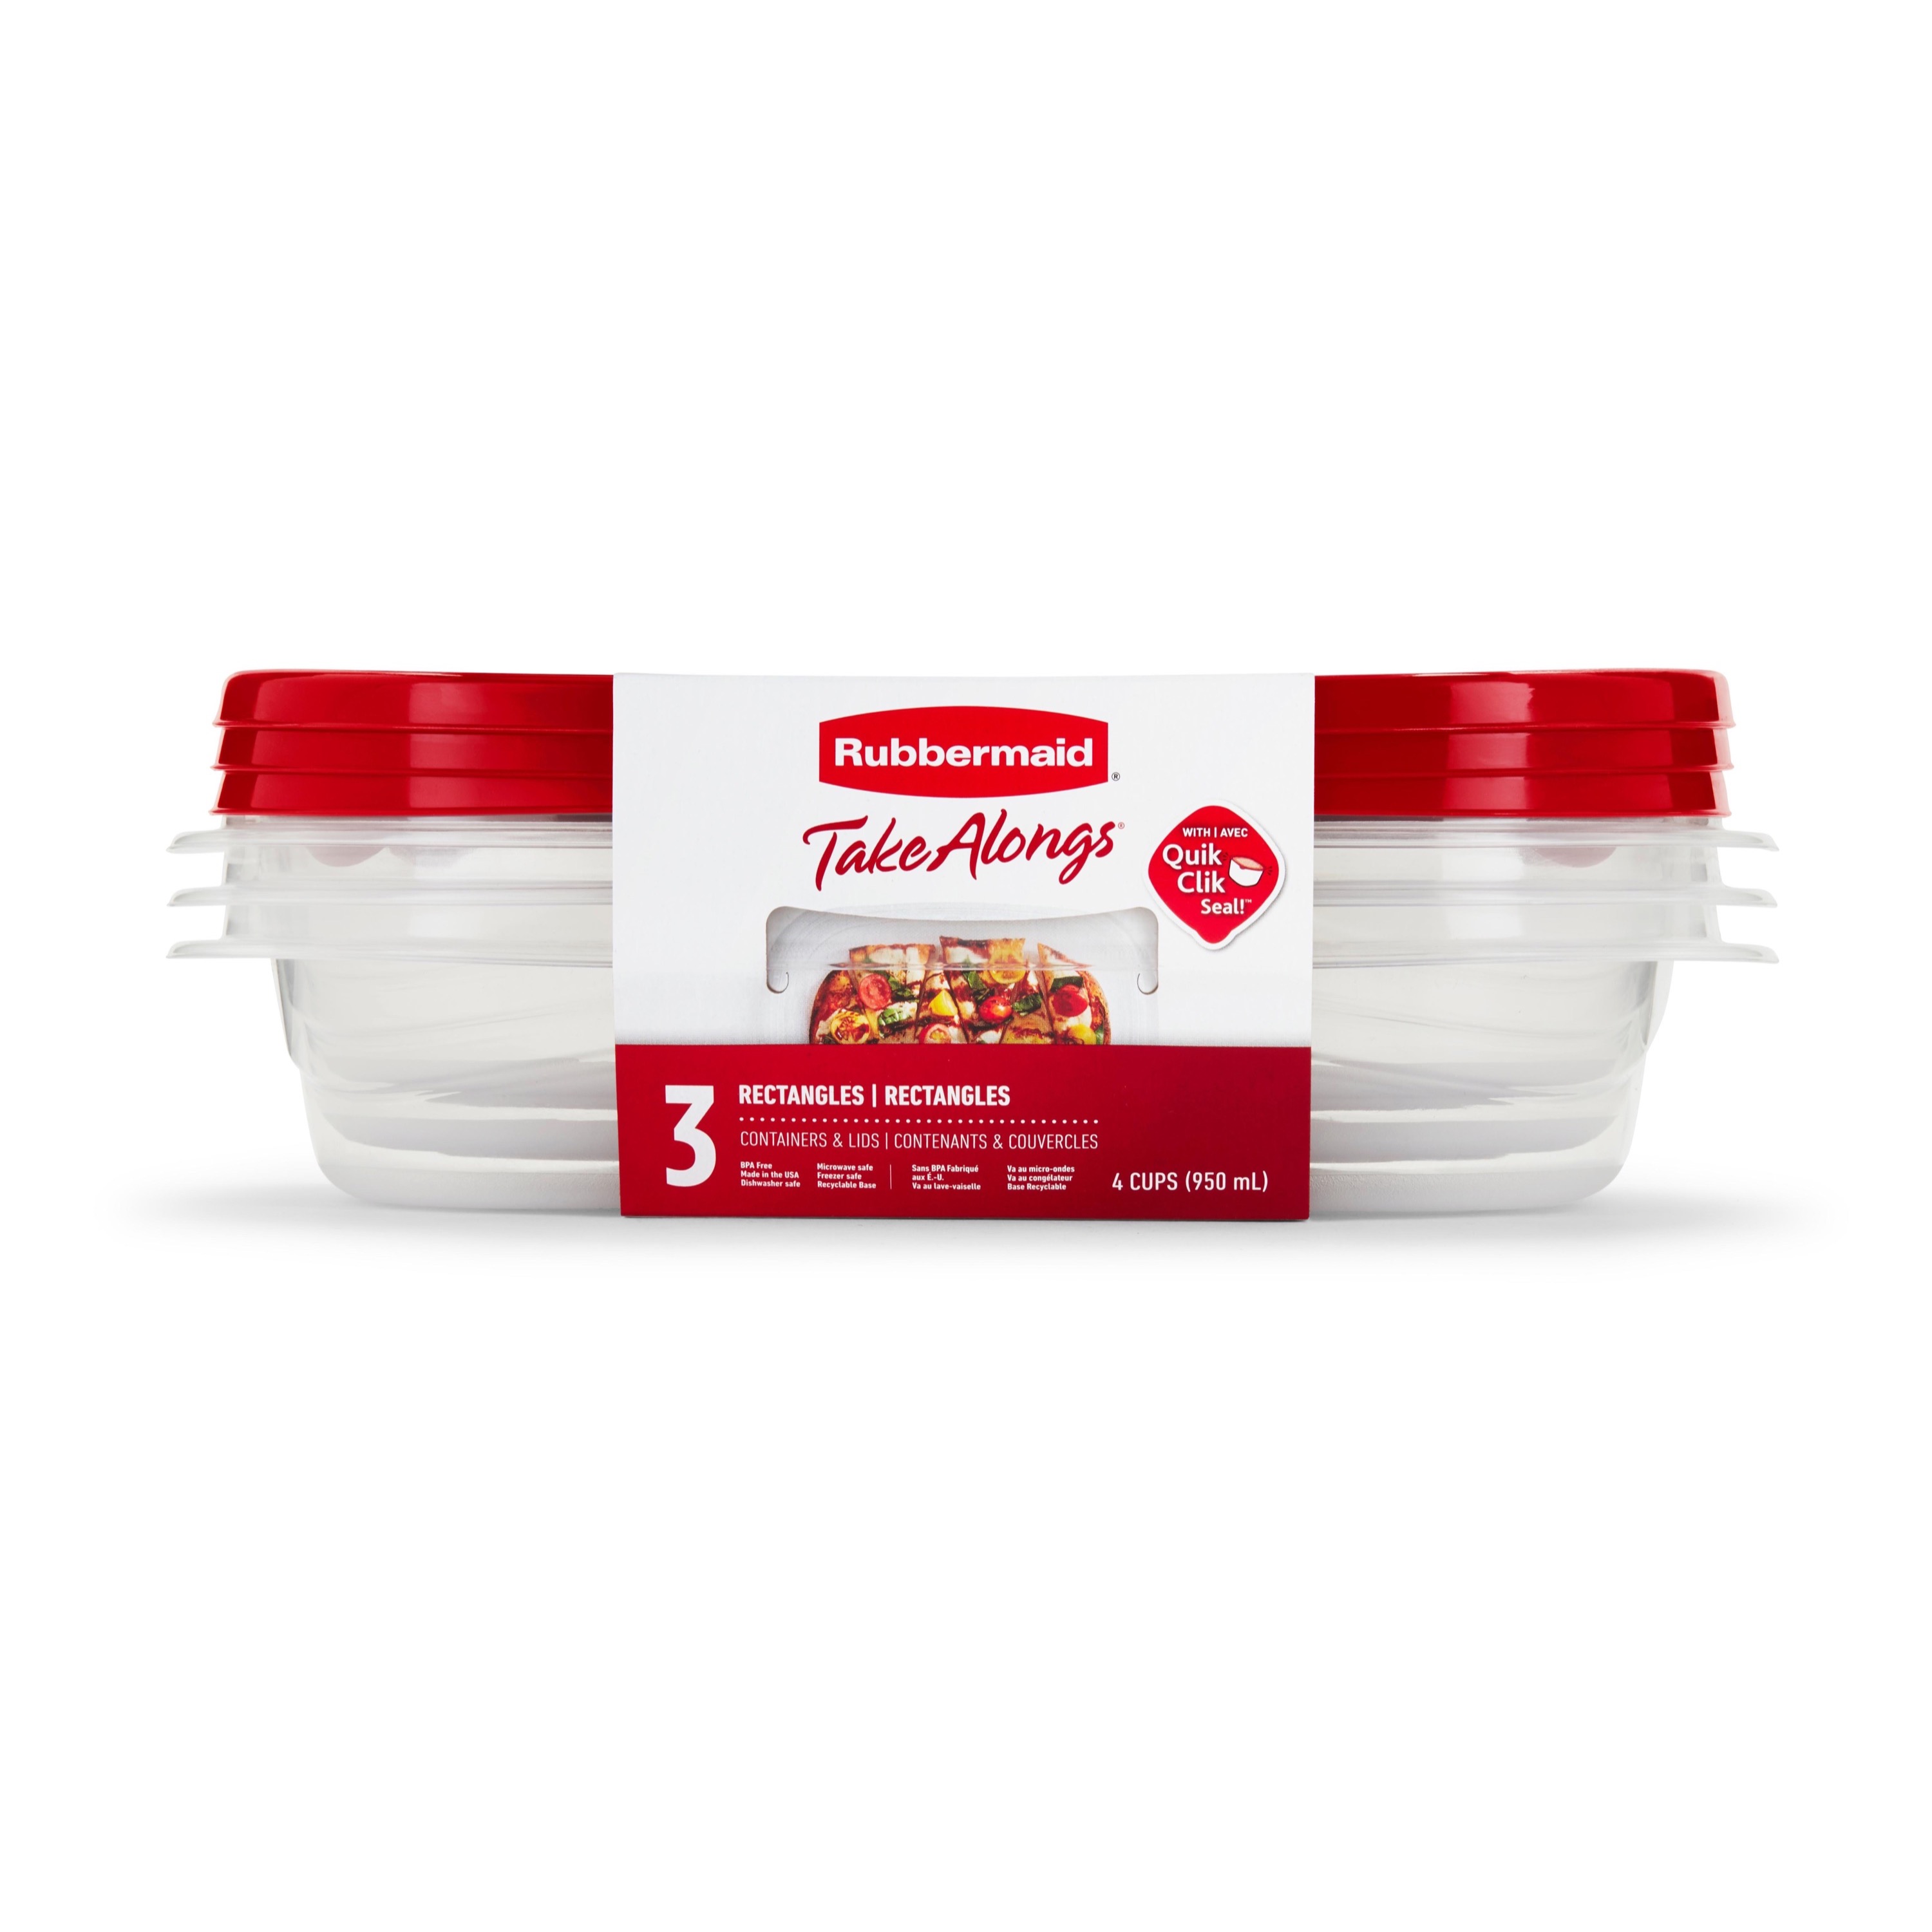 Rubbermaid TakeAlongs 4 Cup Rectangle Food Storage Containers, Set of 3, Red - image 3 of 7